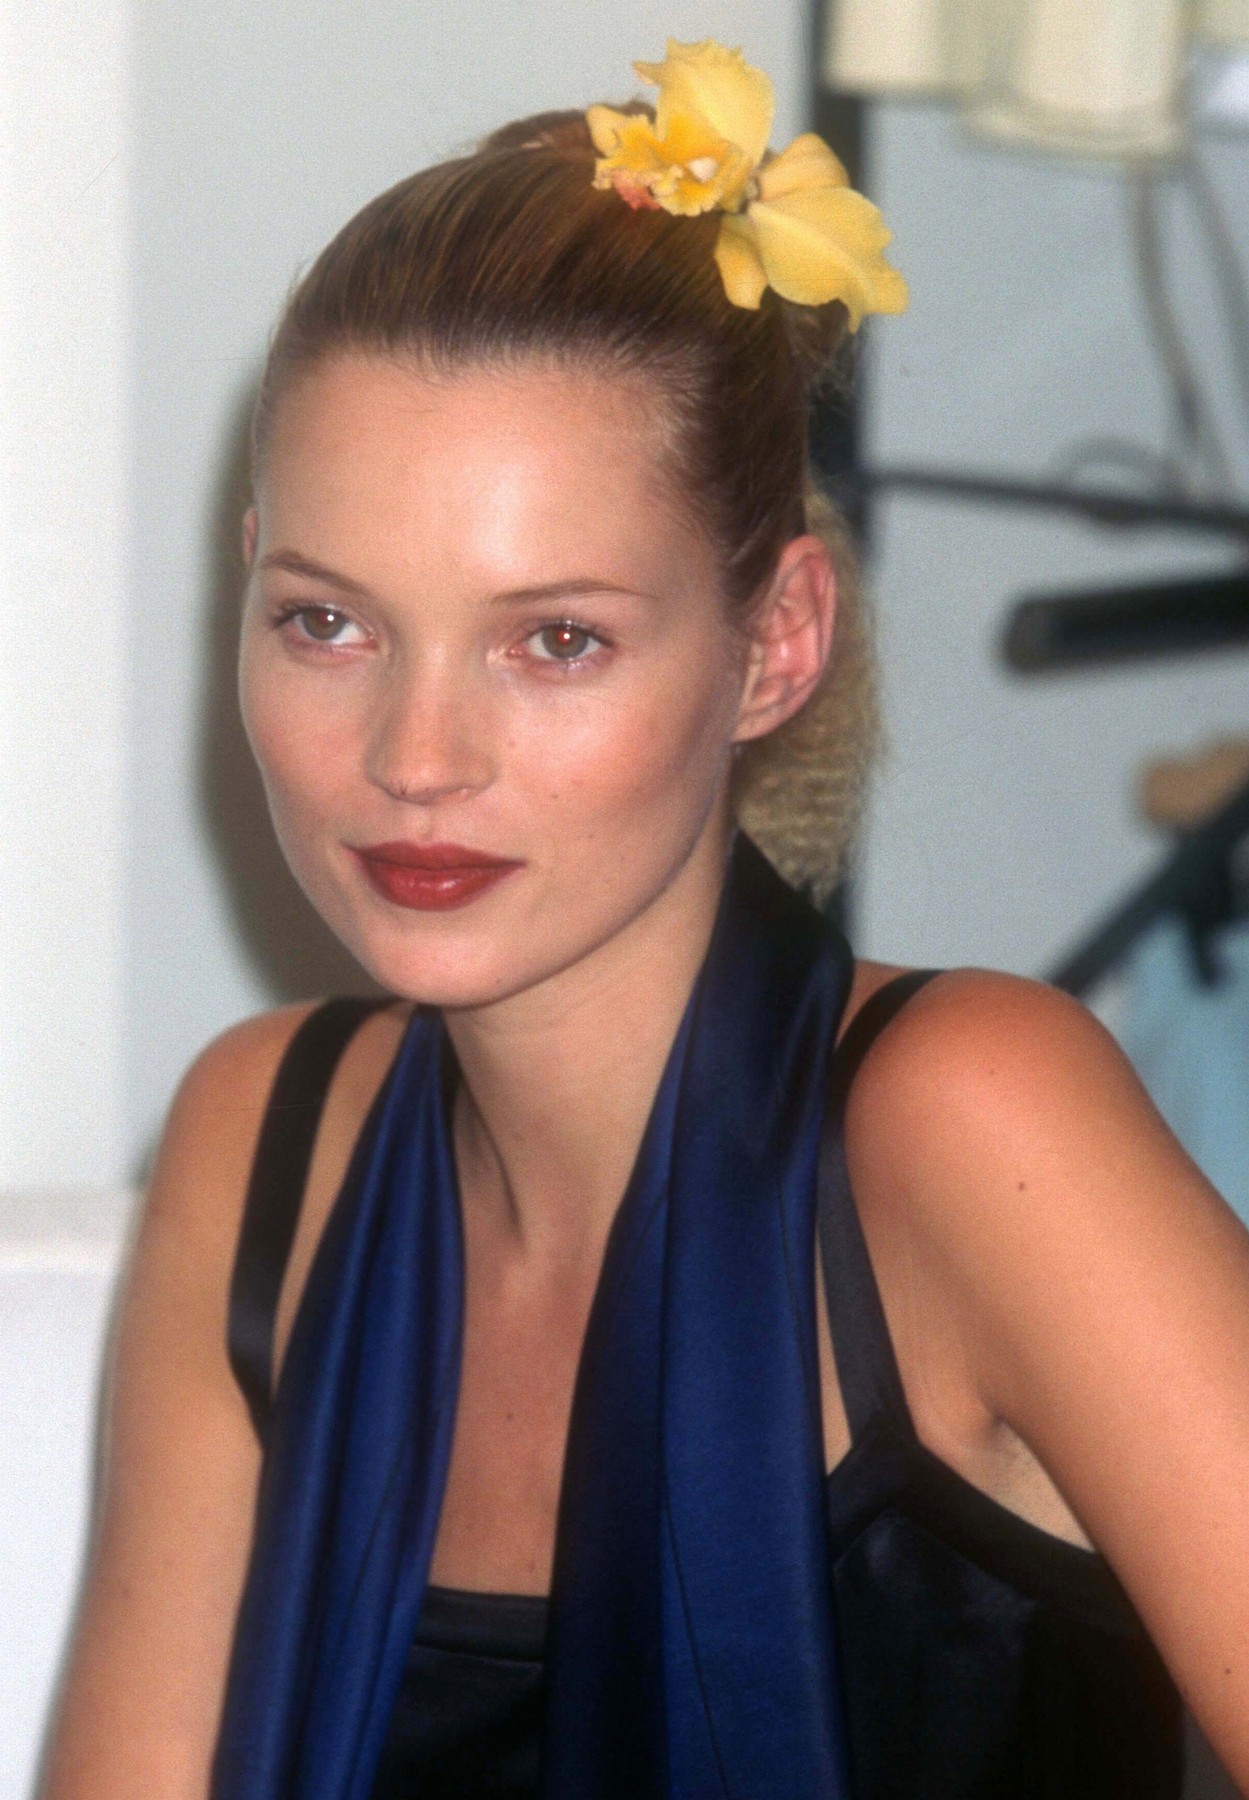 Kate Moss 1996 John Barrett/PHOTOlink/Everett Collection  (Kate Moss054), Image: 481947578, License: Rights-managed, Restrictions: For usage credit please use;, Model Release: no, Credit line: - / Everett / Profimedia